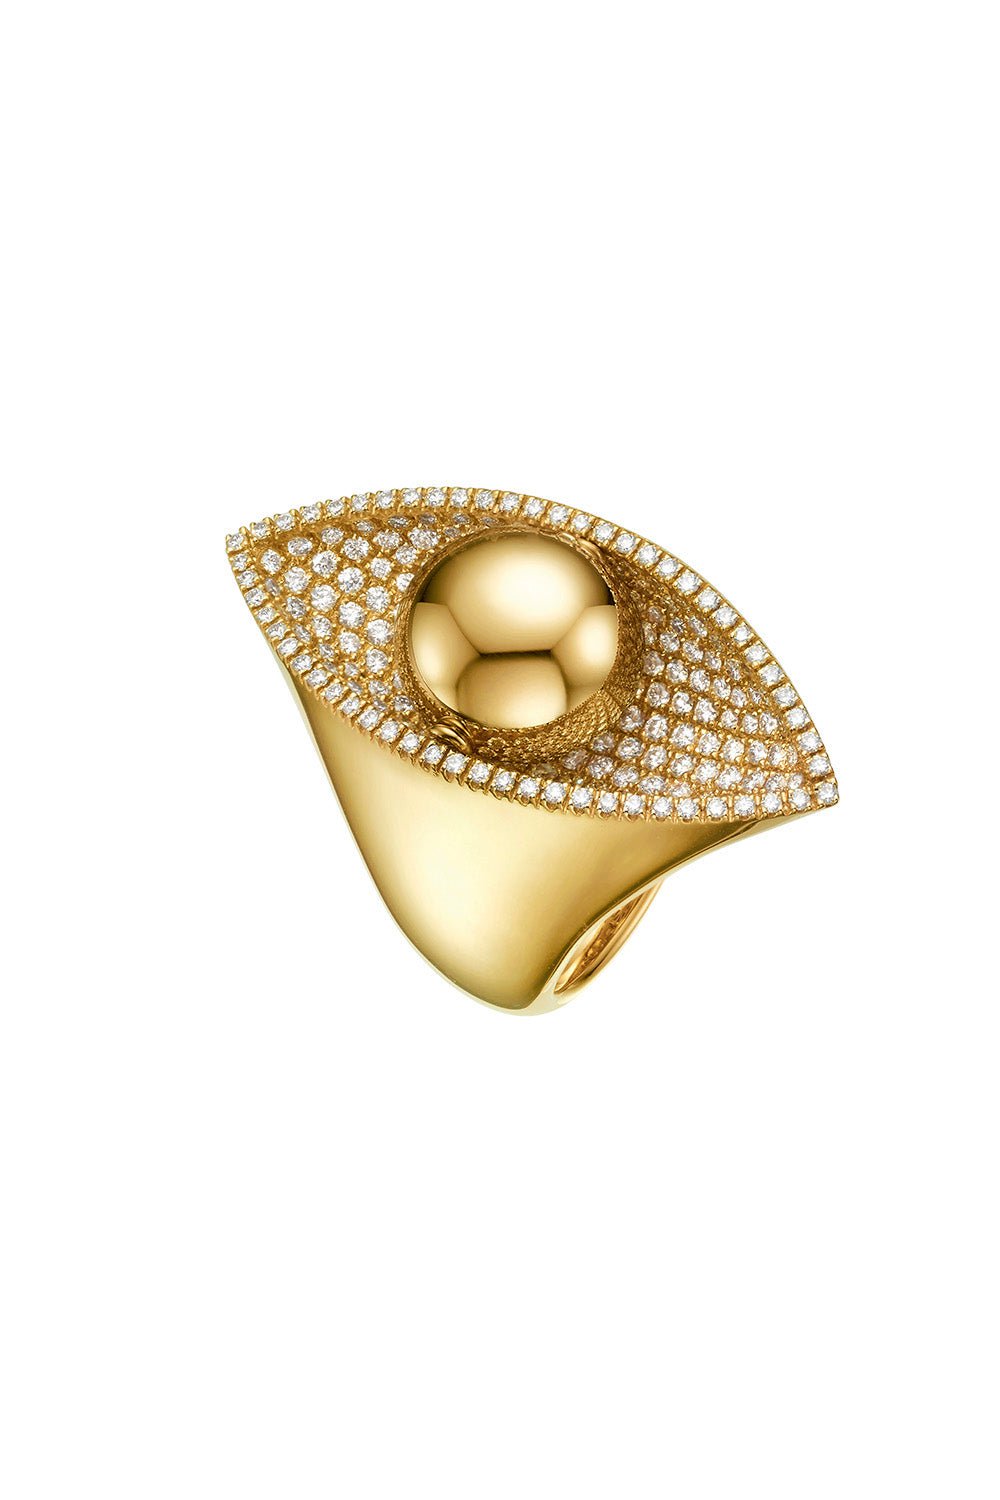 CADAR-Reflections Cocktail Ring-YELLOW GOLD